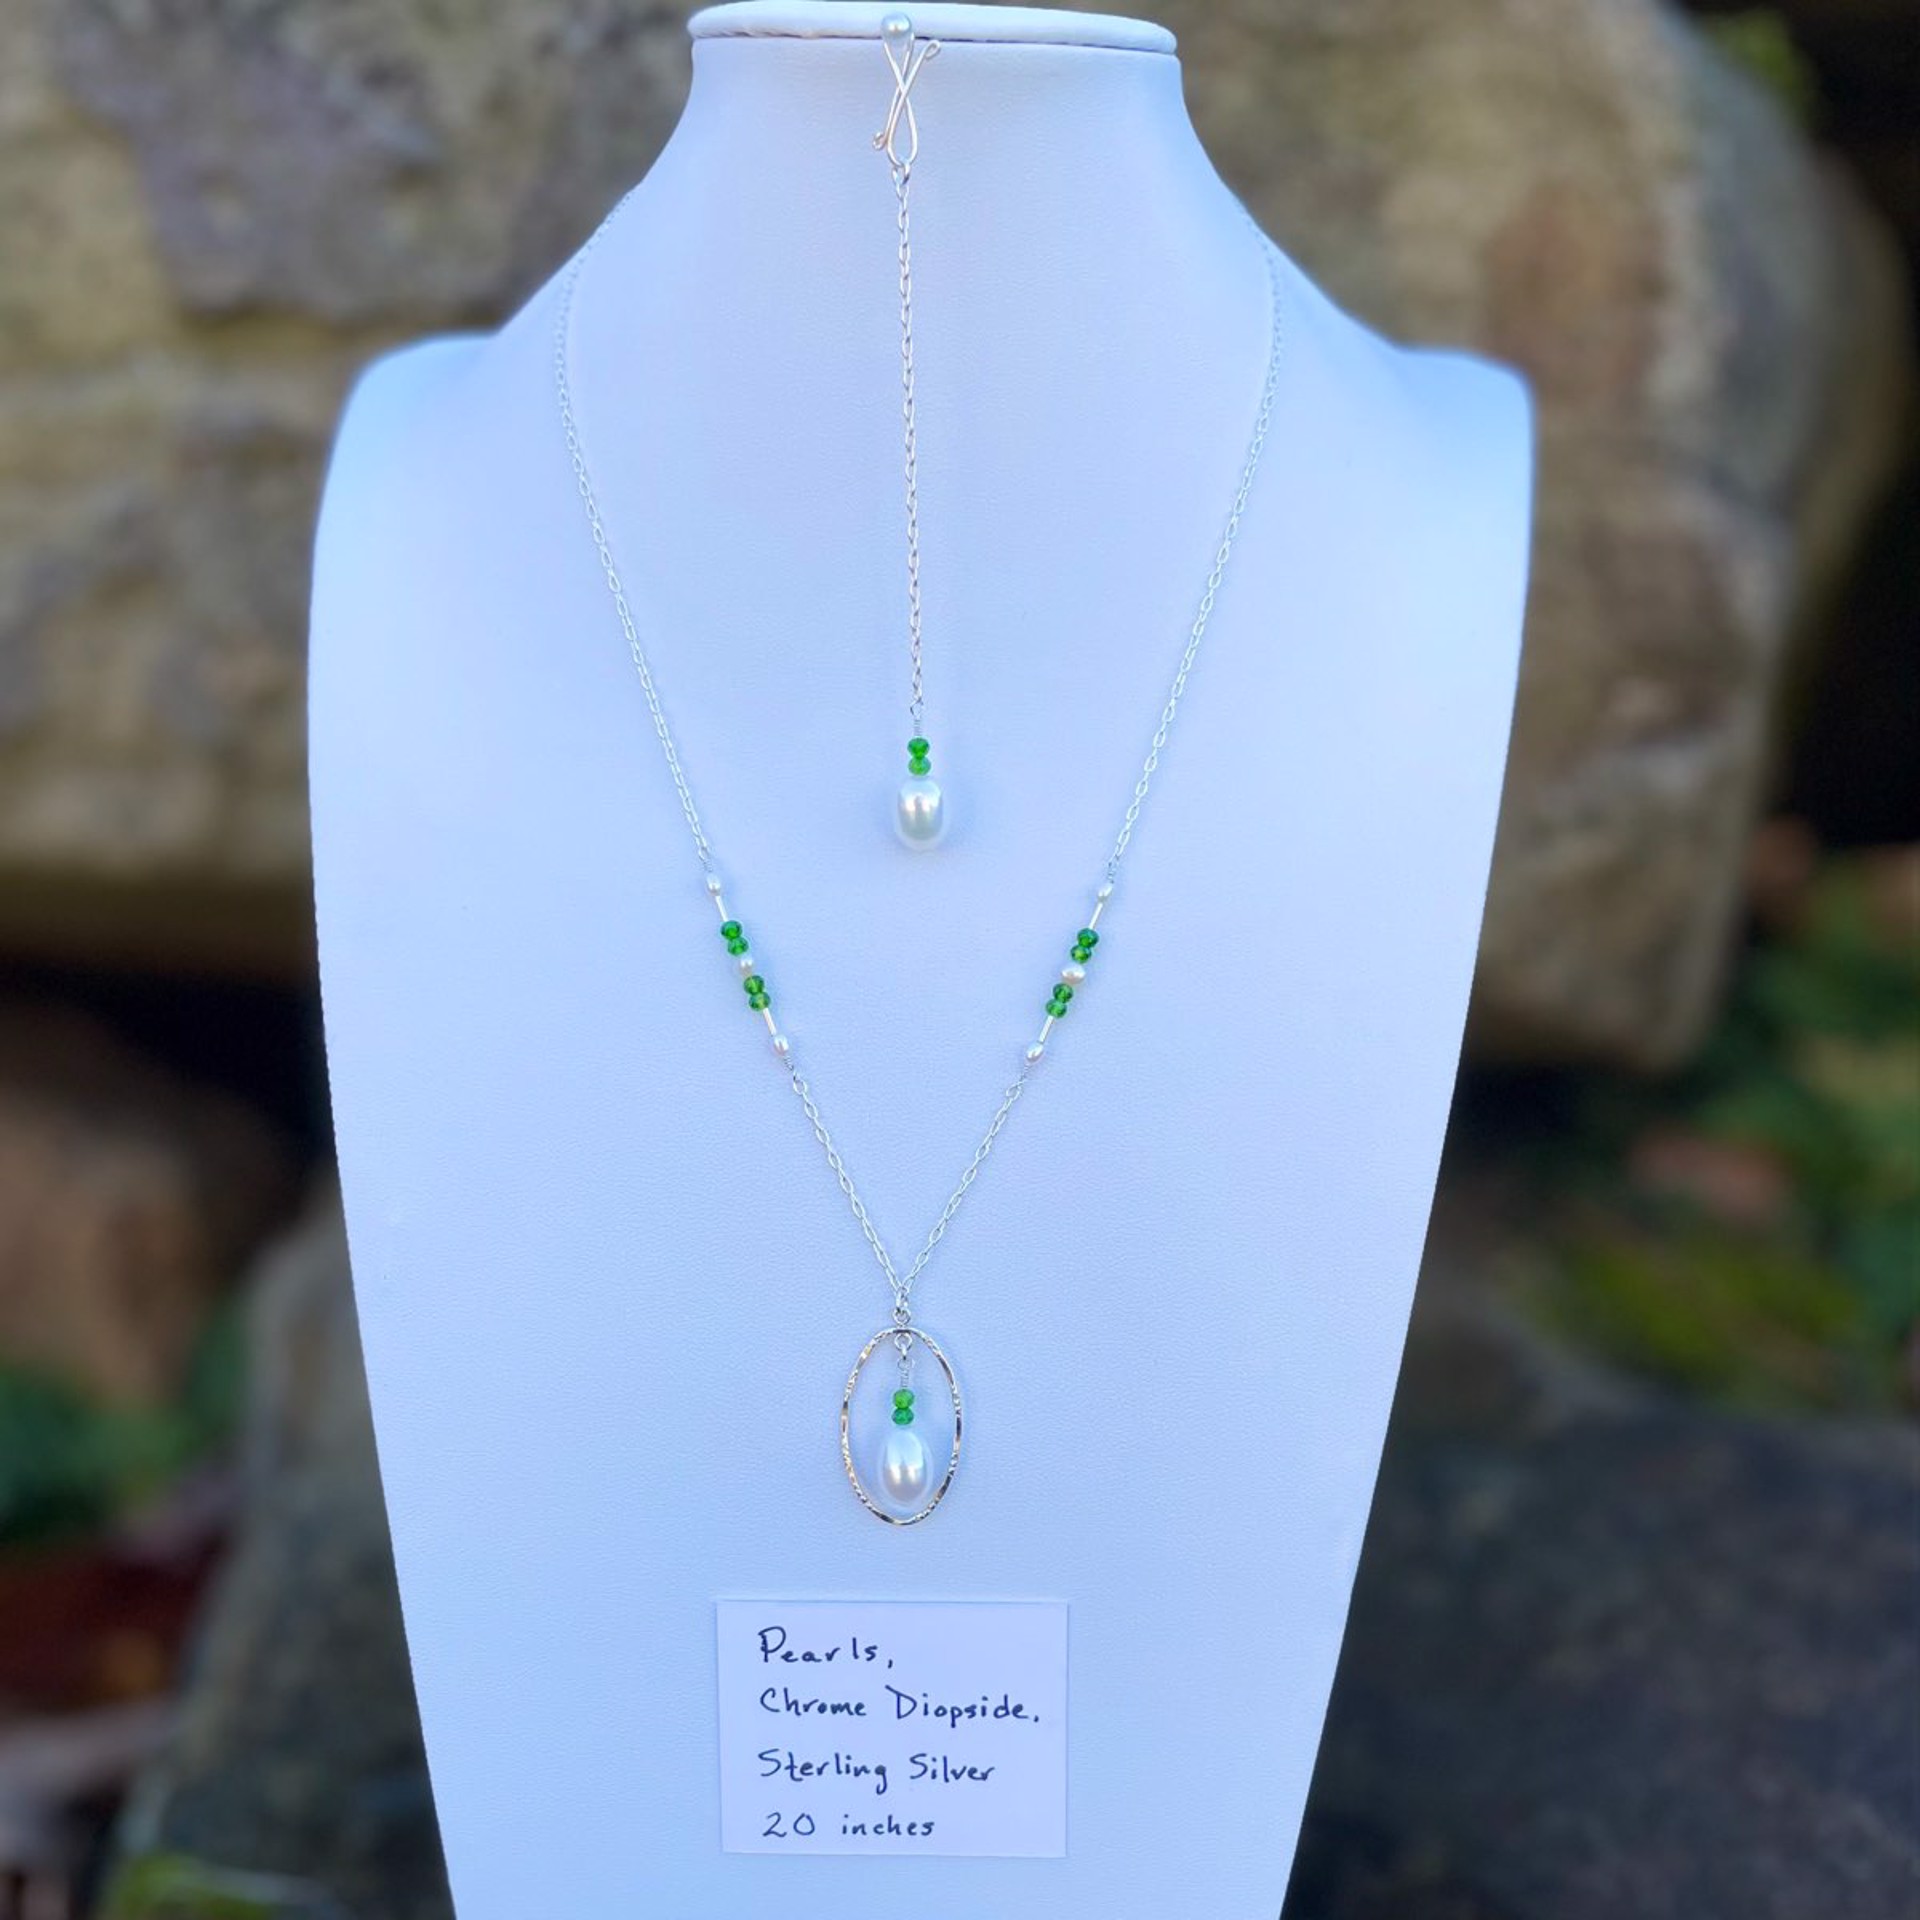 Pearls, Chrome Diopside, and Sterling Silver Necklace Infinity Pendant Set by Lisa Kelley